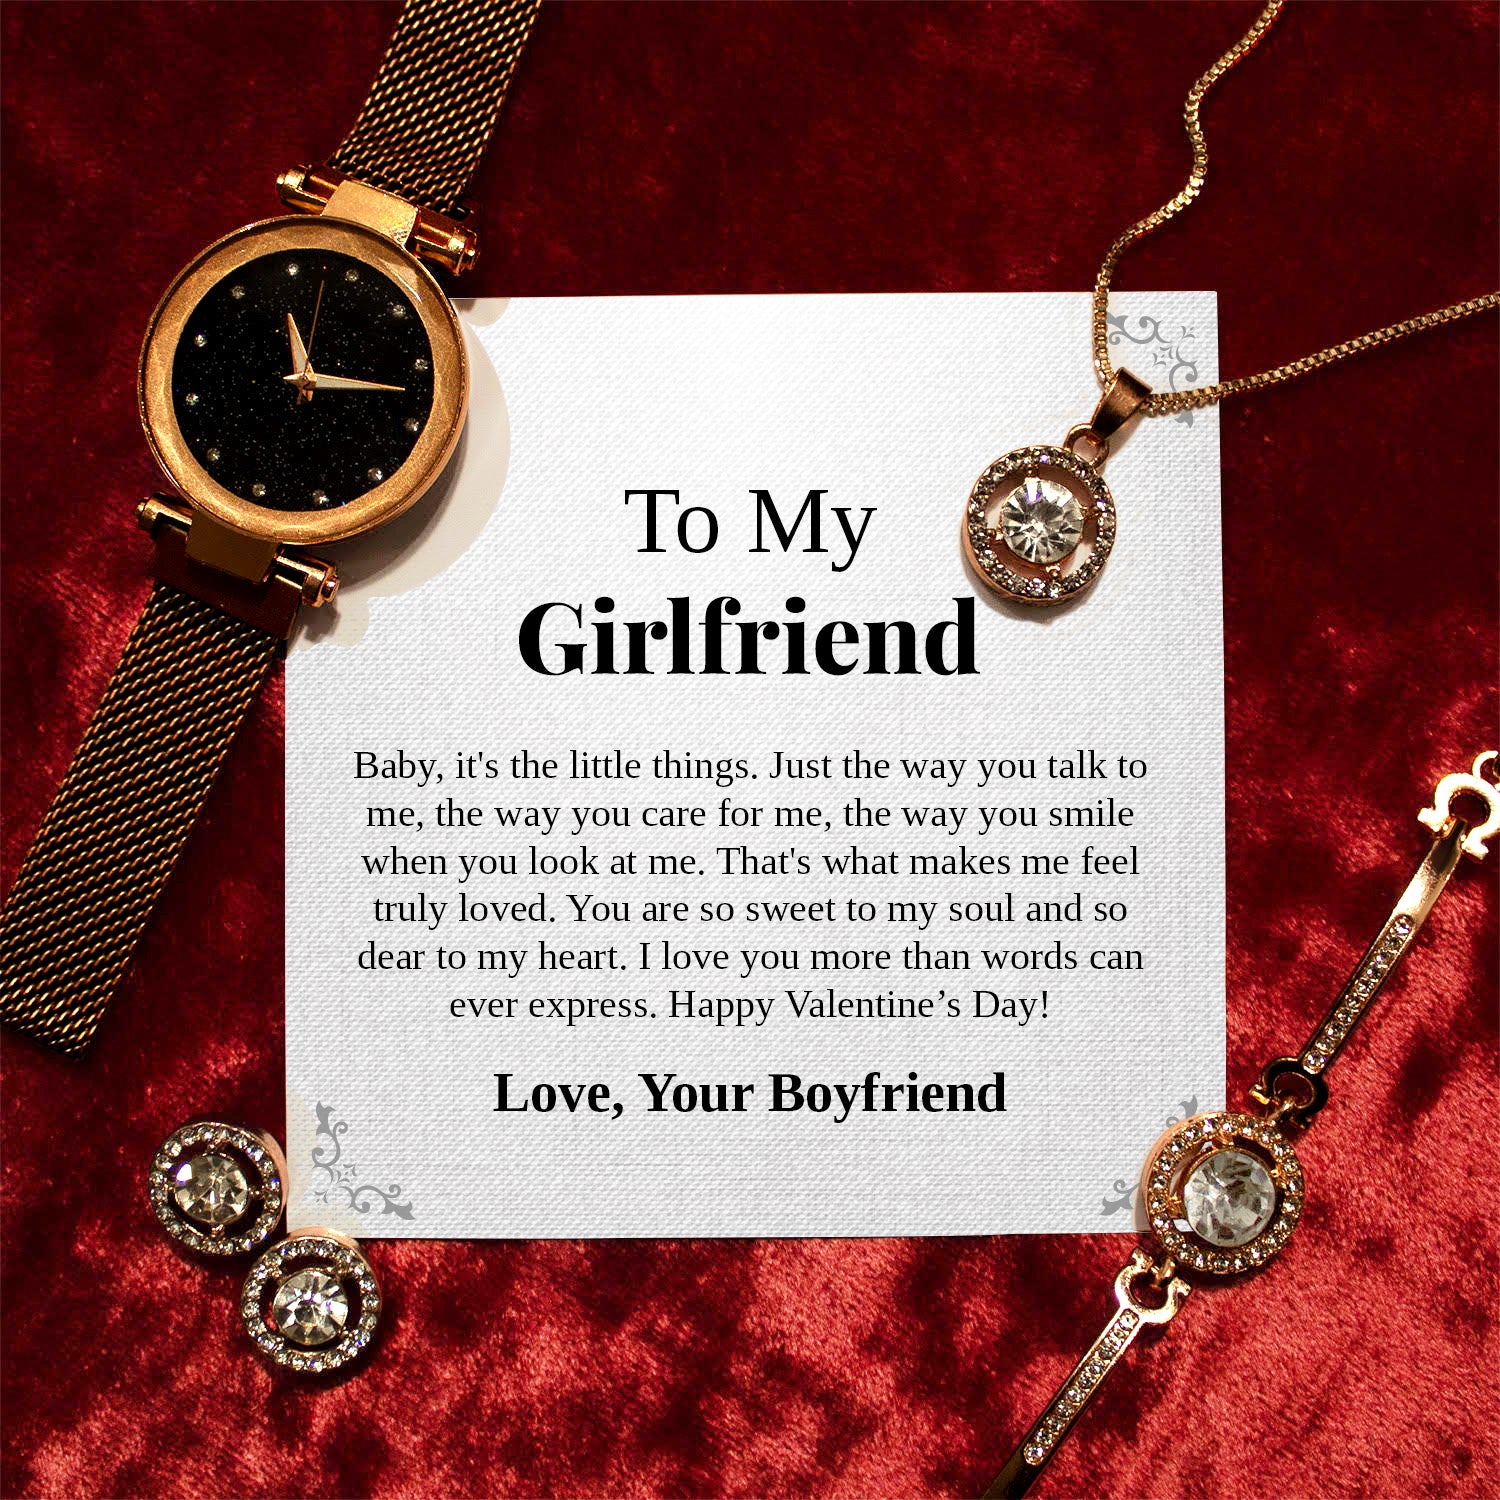 To My Girlfriend | "The Little Things" | Cosmopolitan Set